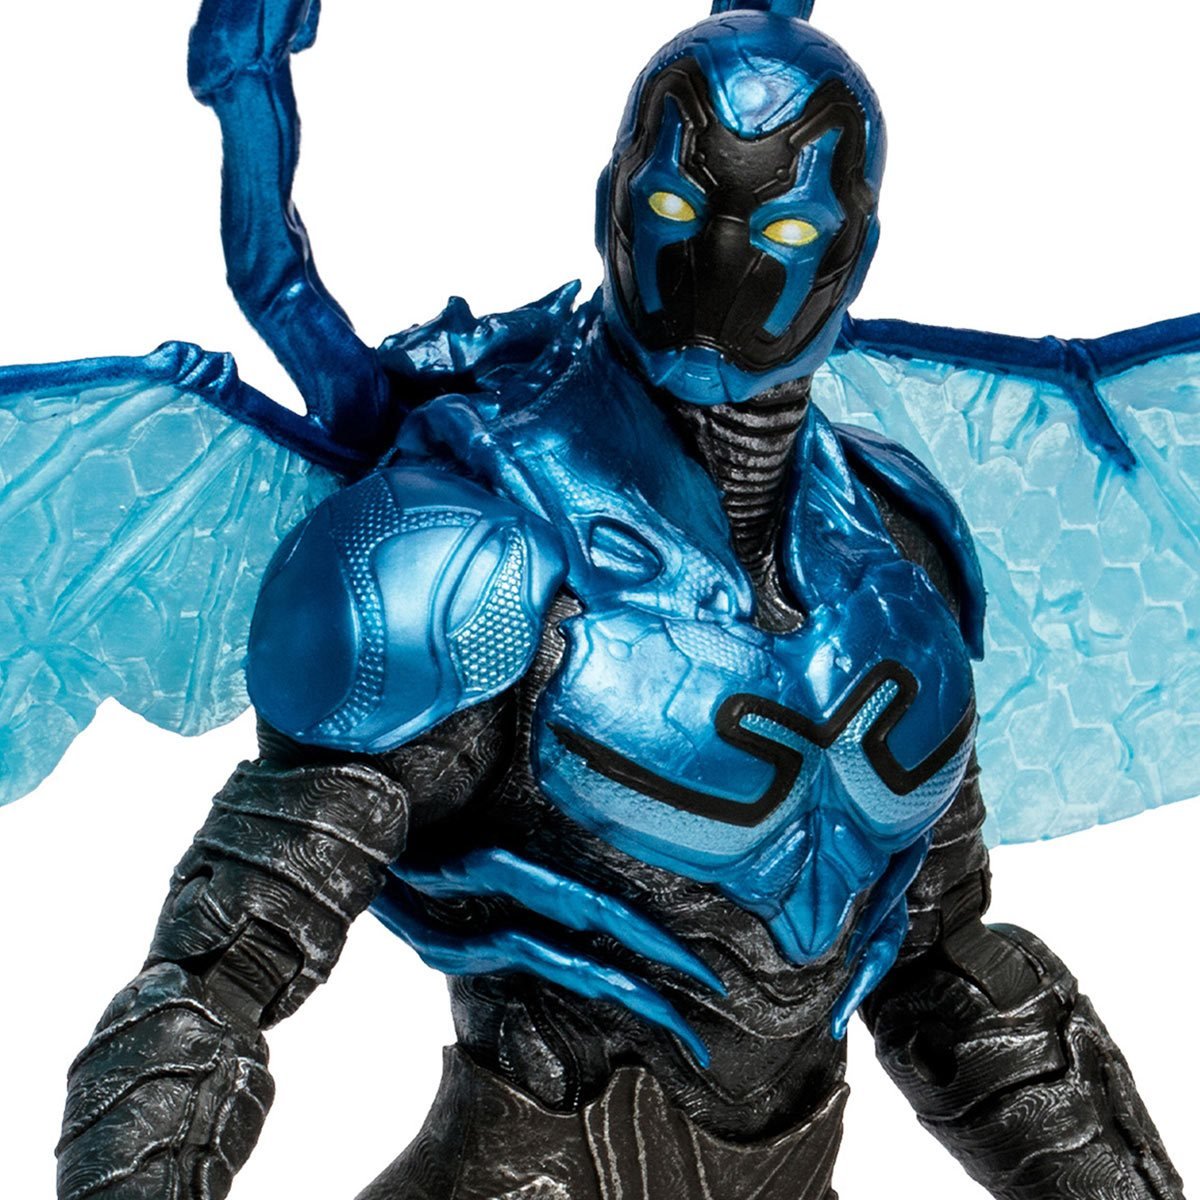 Watch the First 10 Minutes of Blue Beetle for Free on